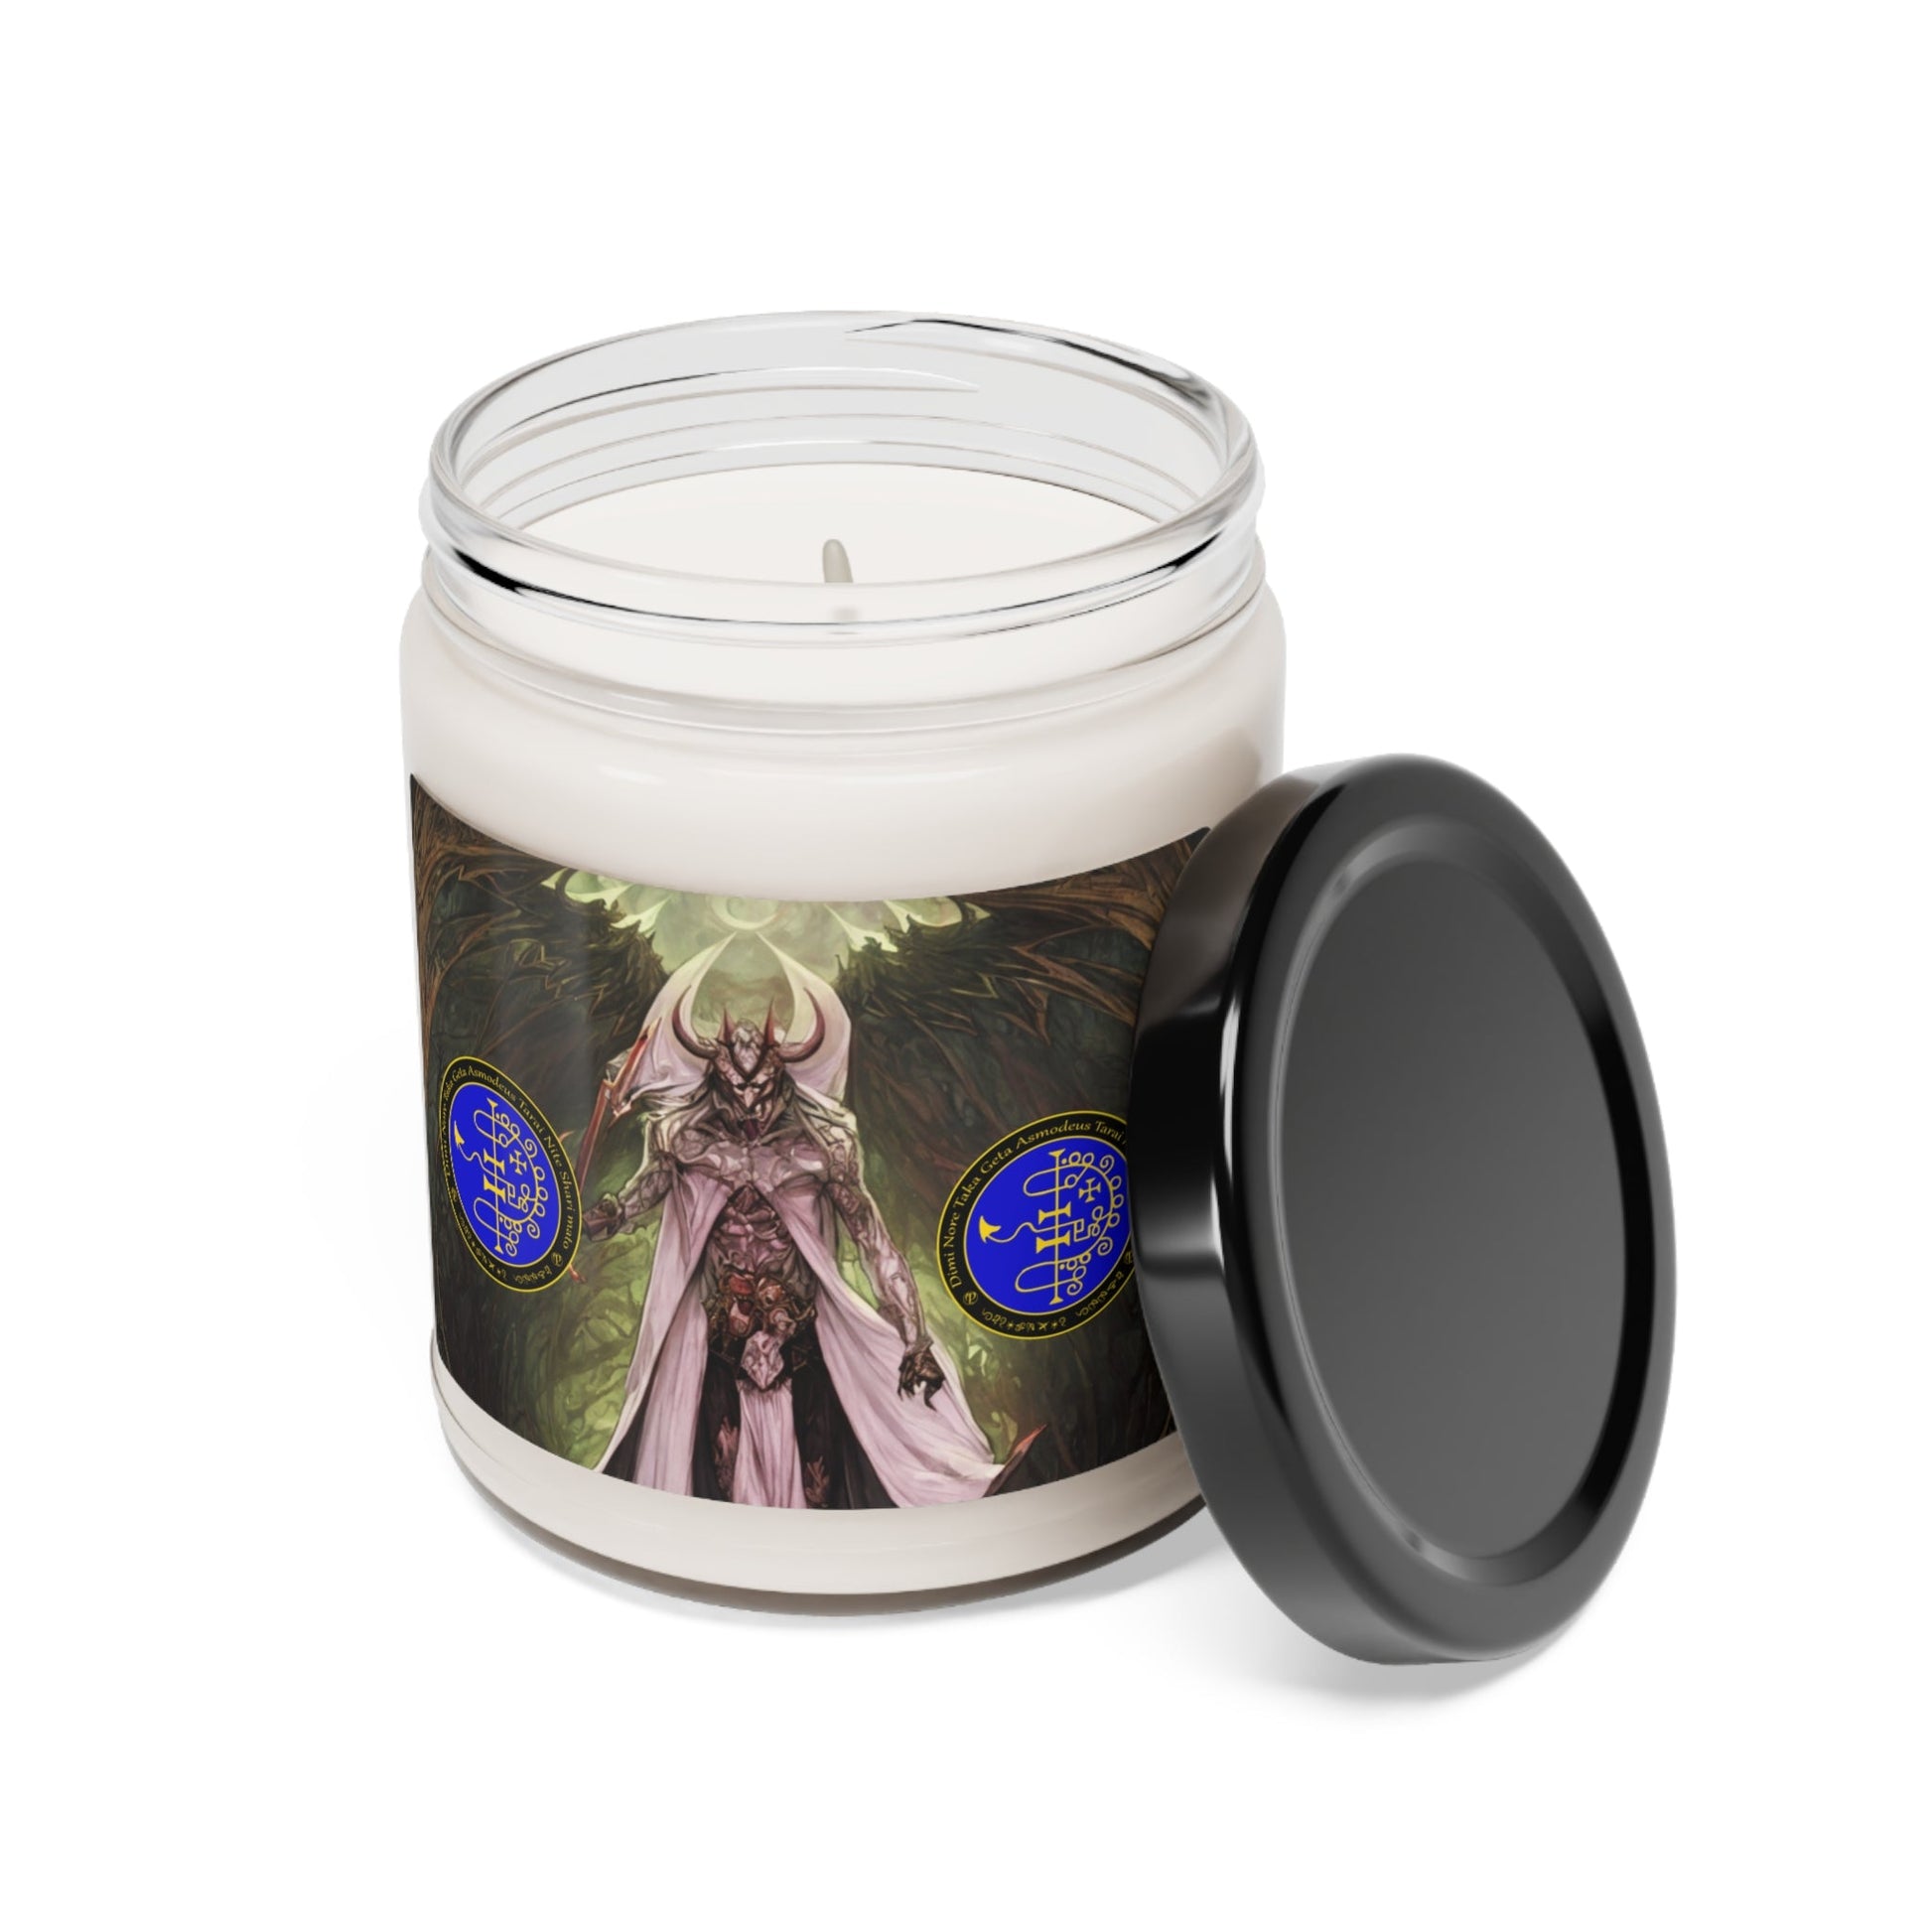 Demon-Asmodeus-Altar-Scented-Soy-Candle-for-Gambling-related-offerings-rituals-initiations-or-praying-and-meditation-7